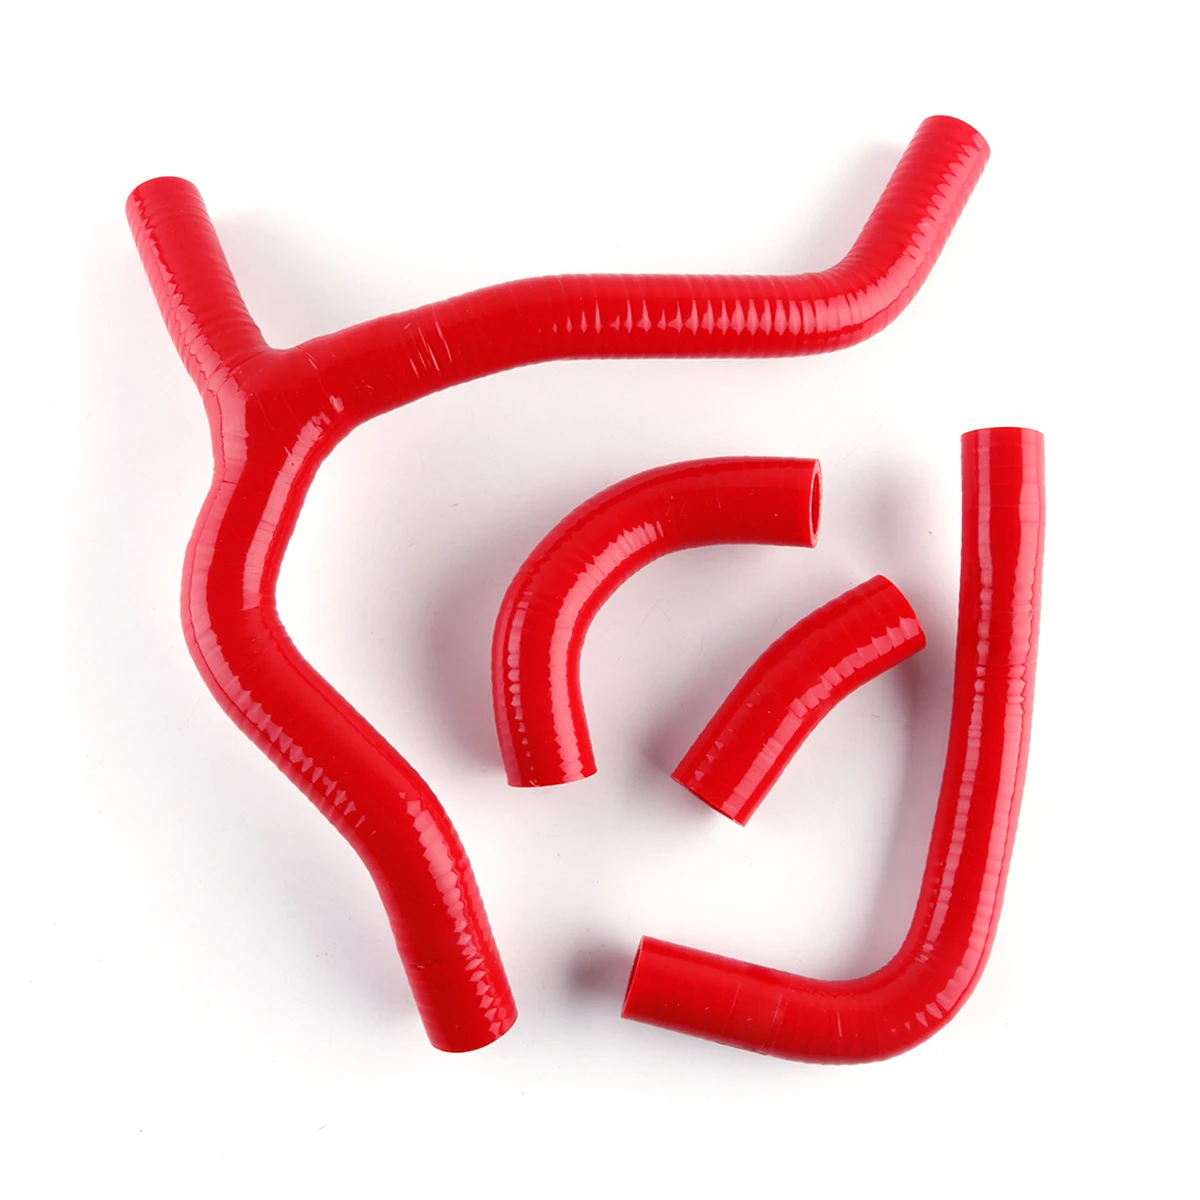 

FOR HONDA CRF 450 R 2013-2014 CRF450R 13 14 HIGH PERFORMANCE RADIATOR SILICONE HOSES Y-KIT PIPES TUBES 4PCS 10 COLORS